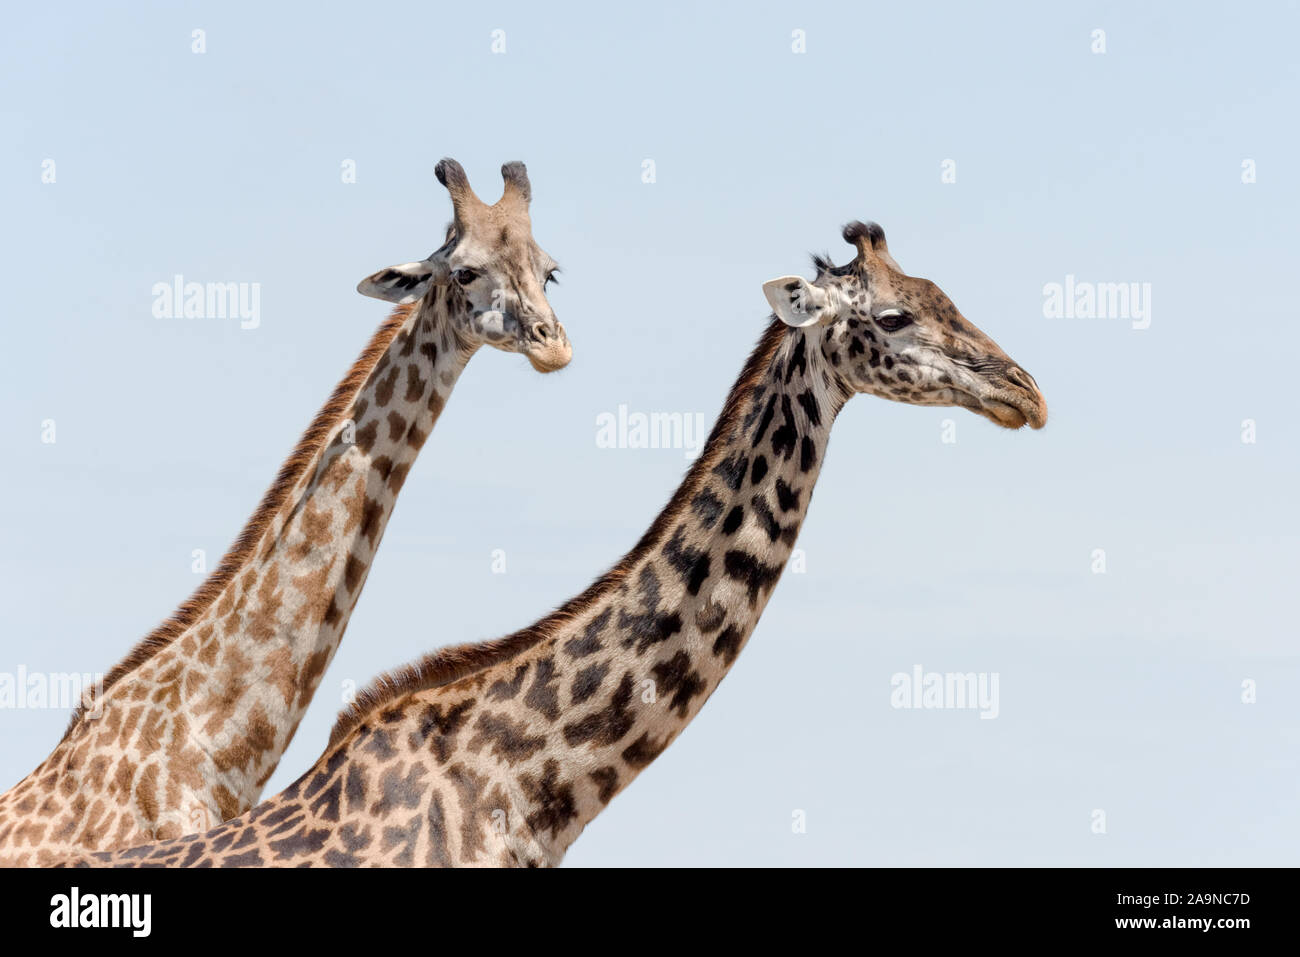 Necks and heads of two giraffes against a blue sky Stock Photo